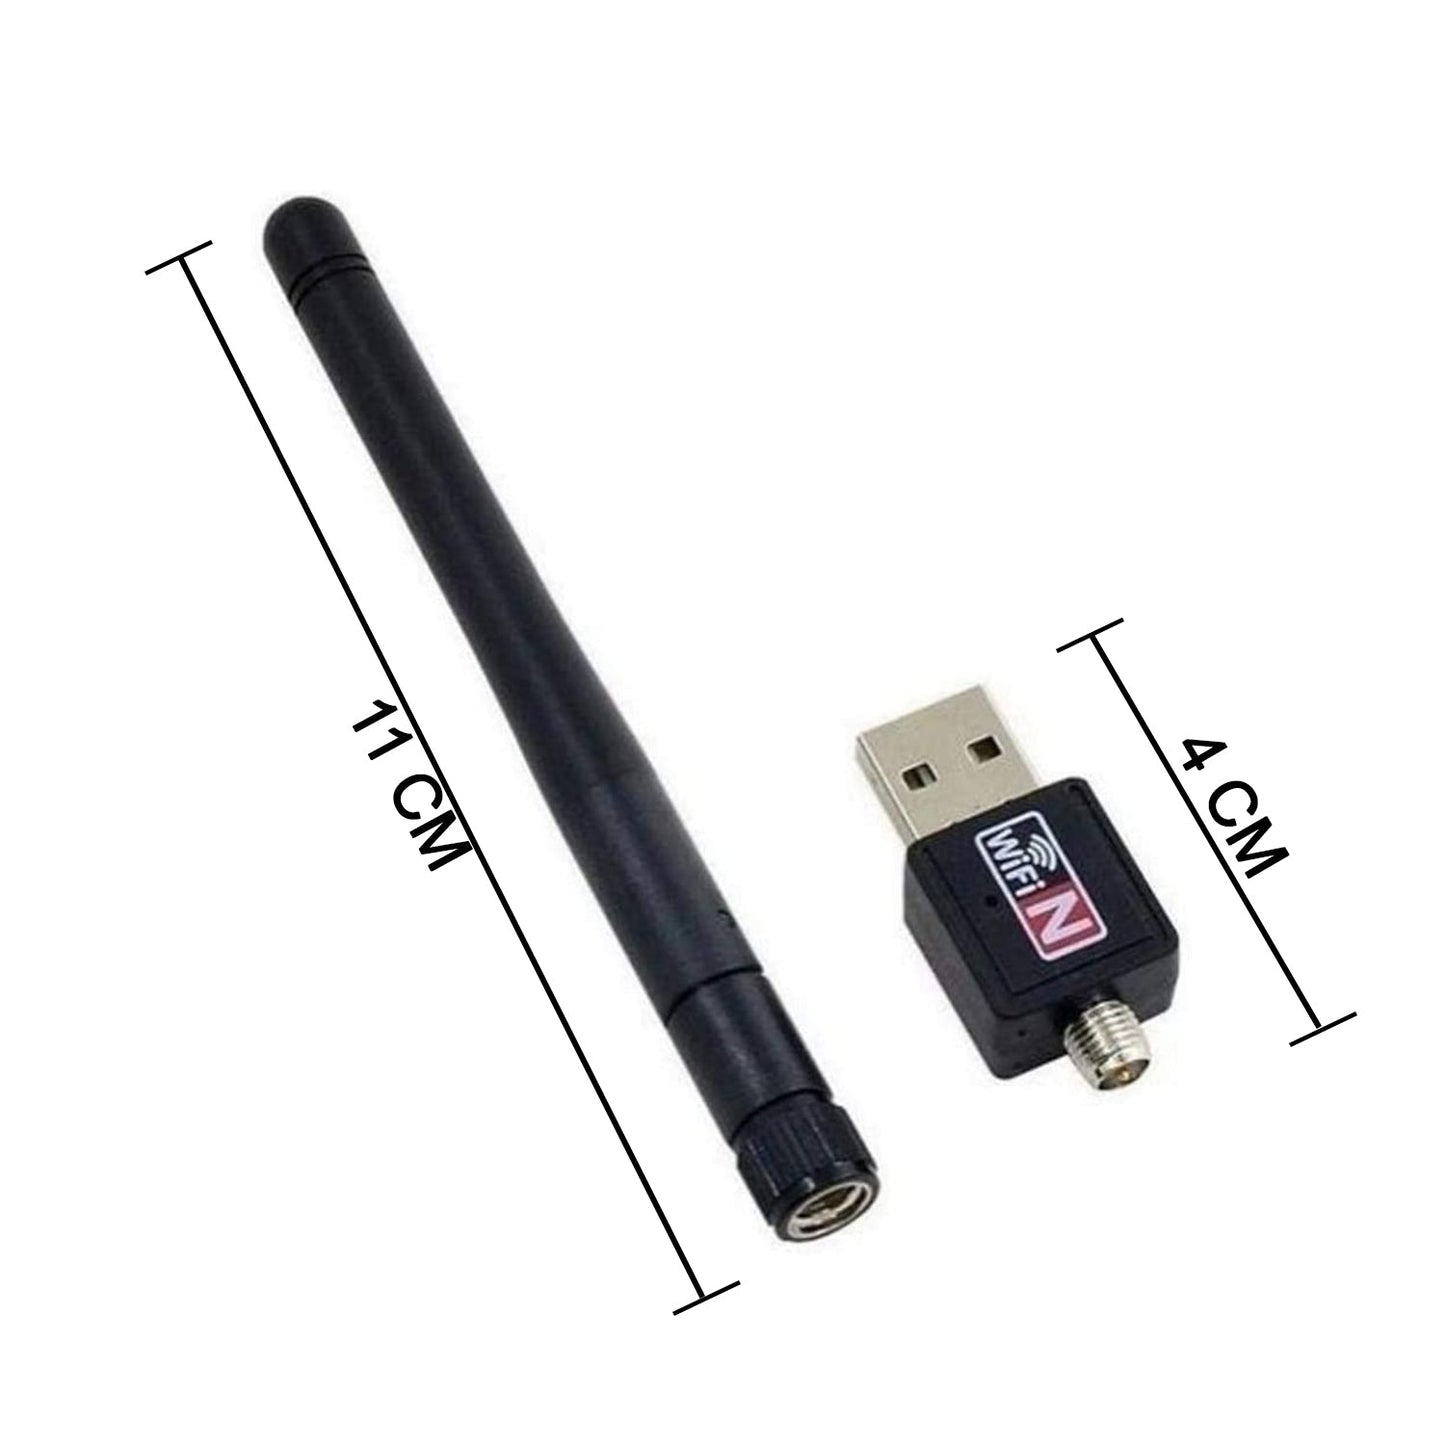 0321 USB Wifi Receiver used in all kinds of household and official places for daily use of internet purposes by types of people etc. DeoDap